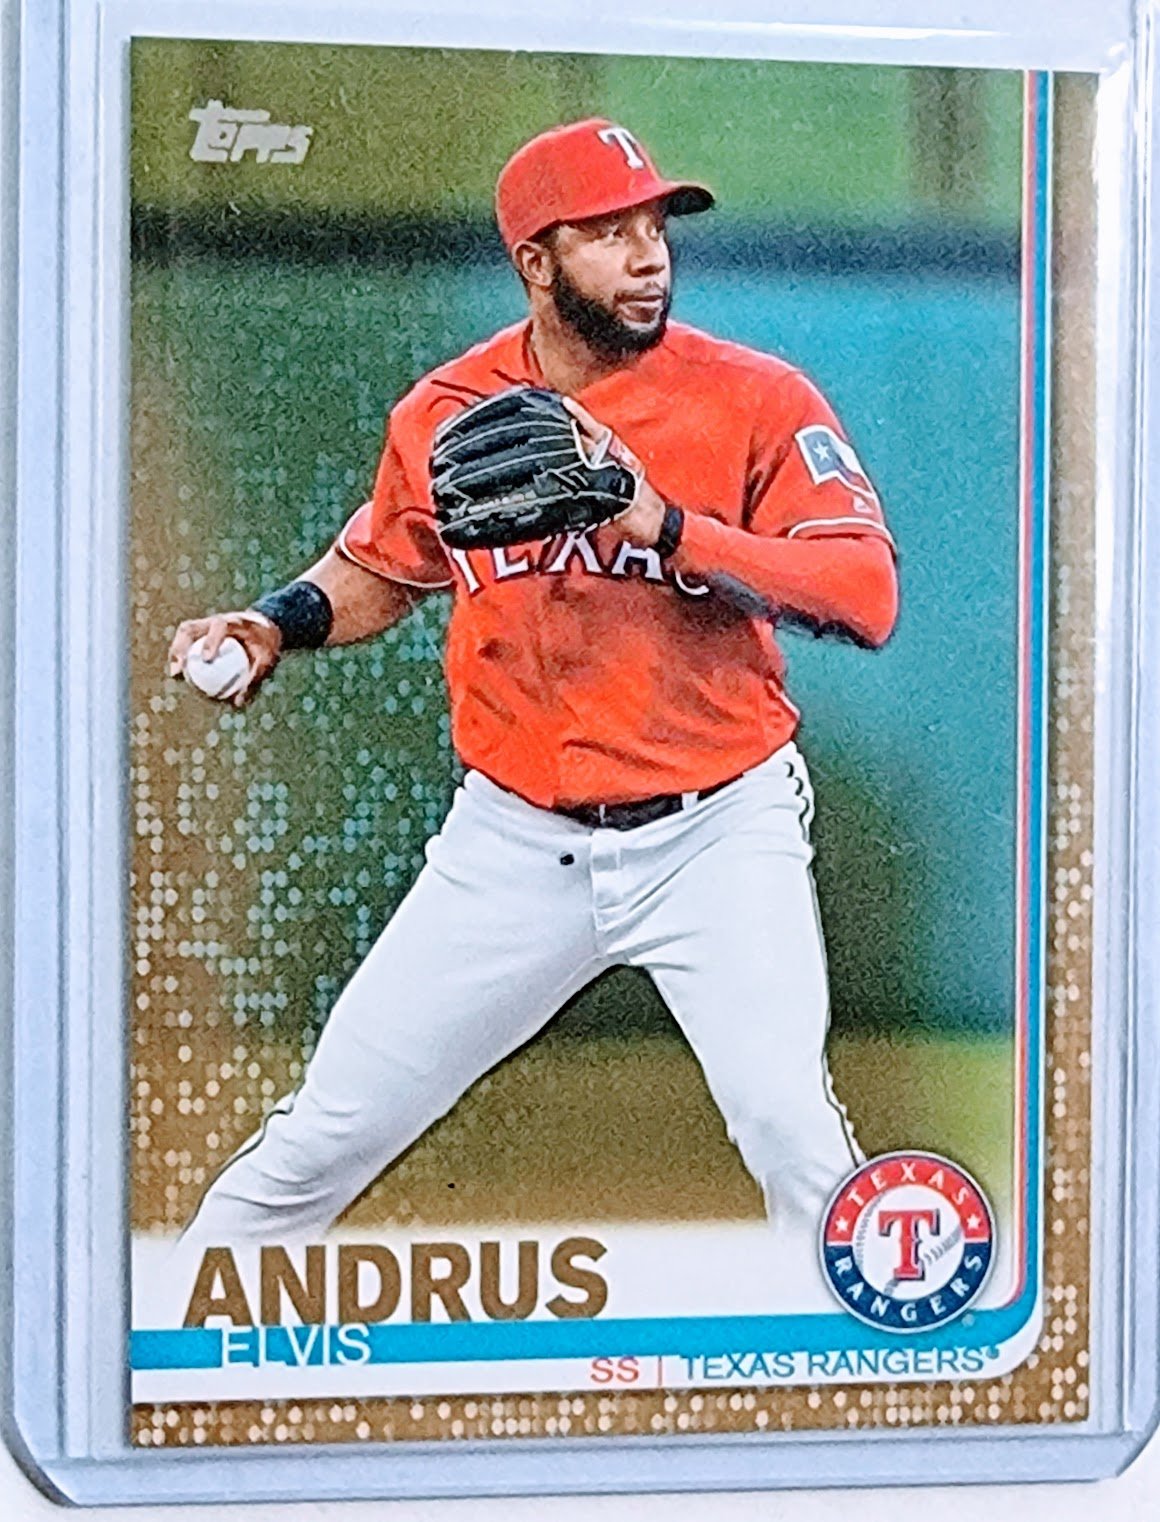 2019 Topps Elvis Andrus #'d/2019 Insert Baseball Card TPTV simple Xclusive Collectibles   